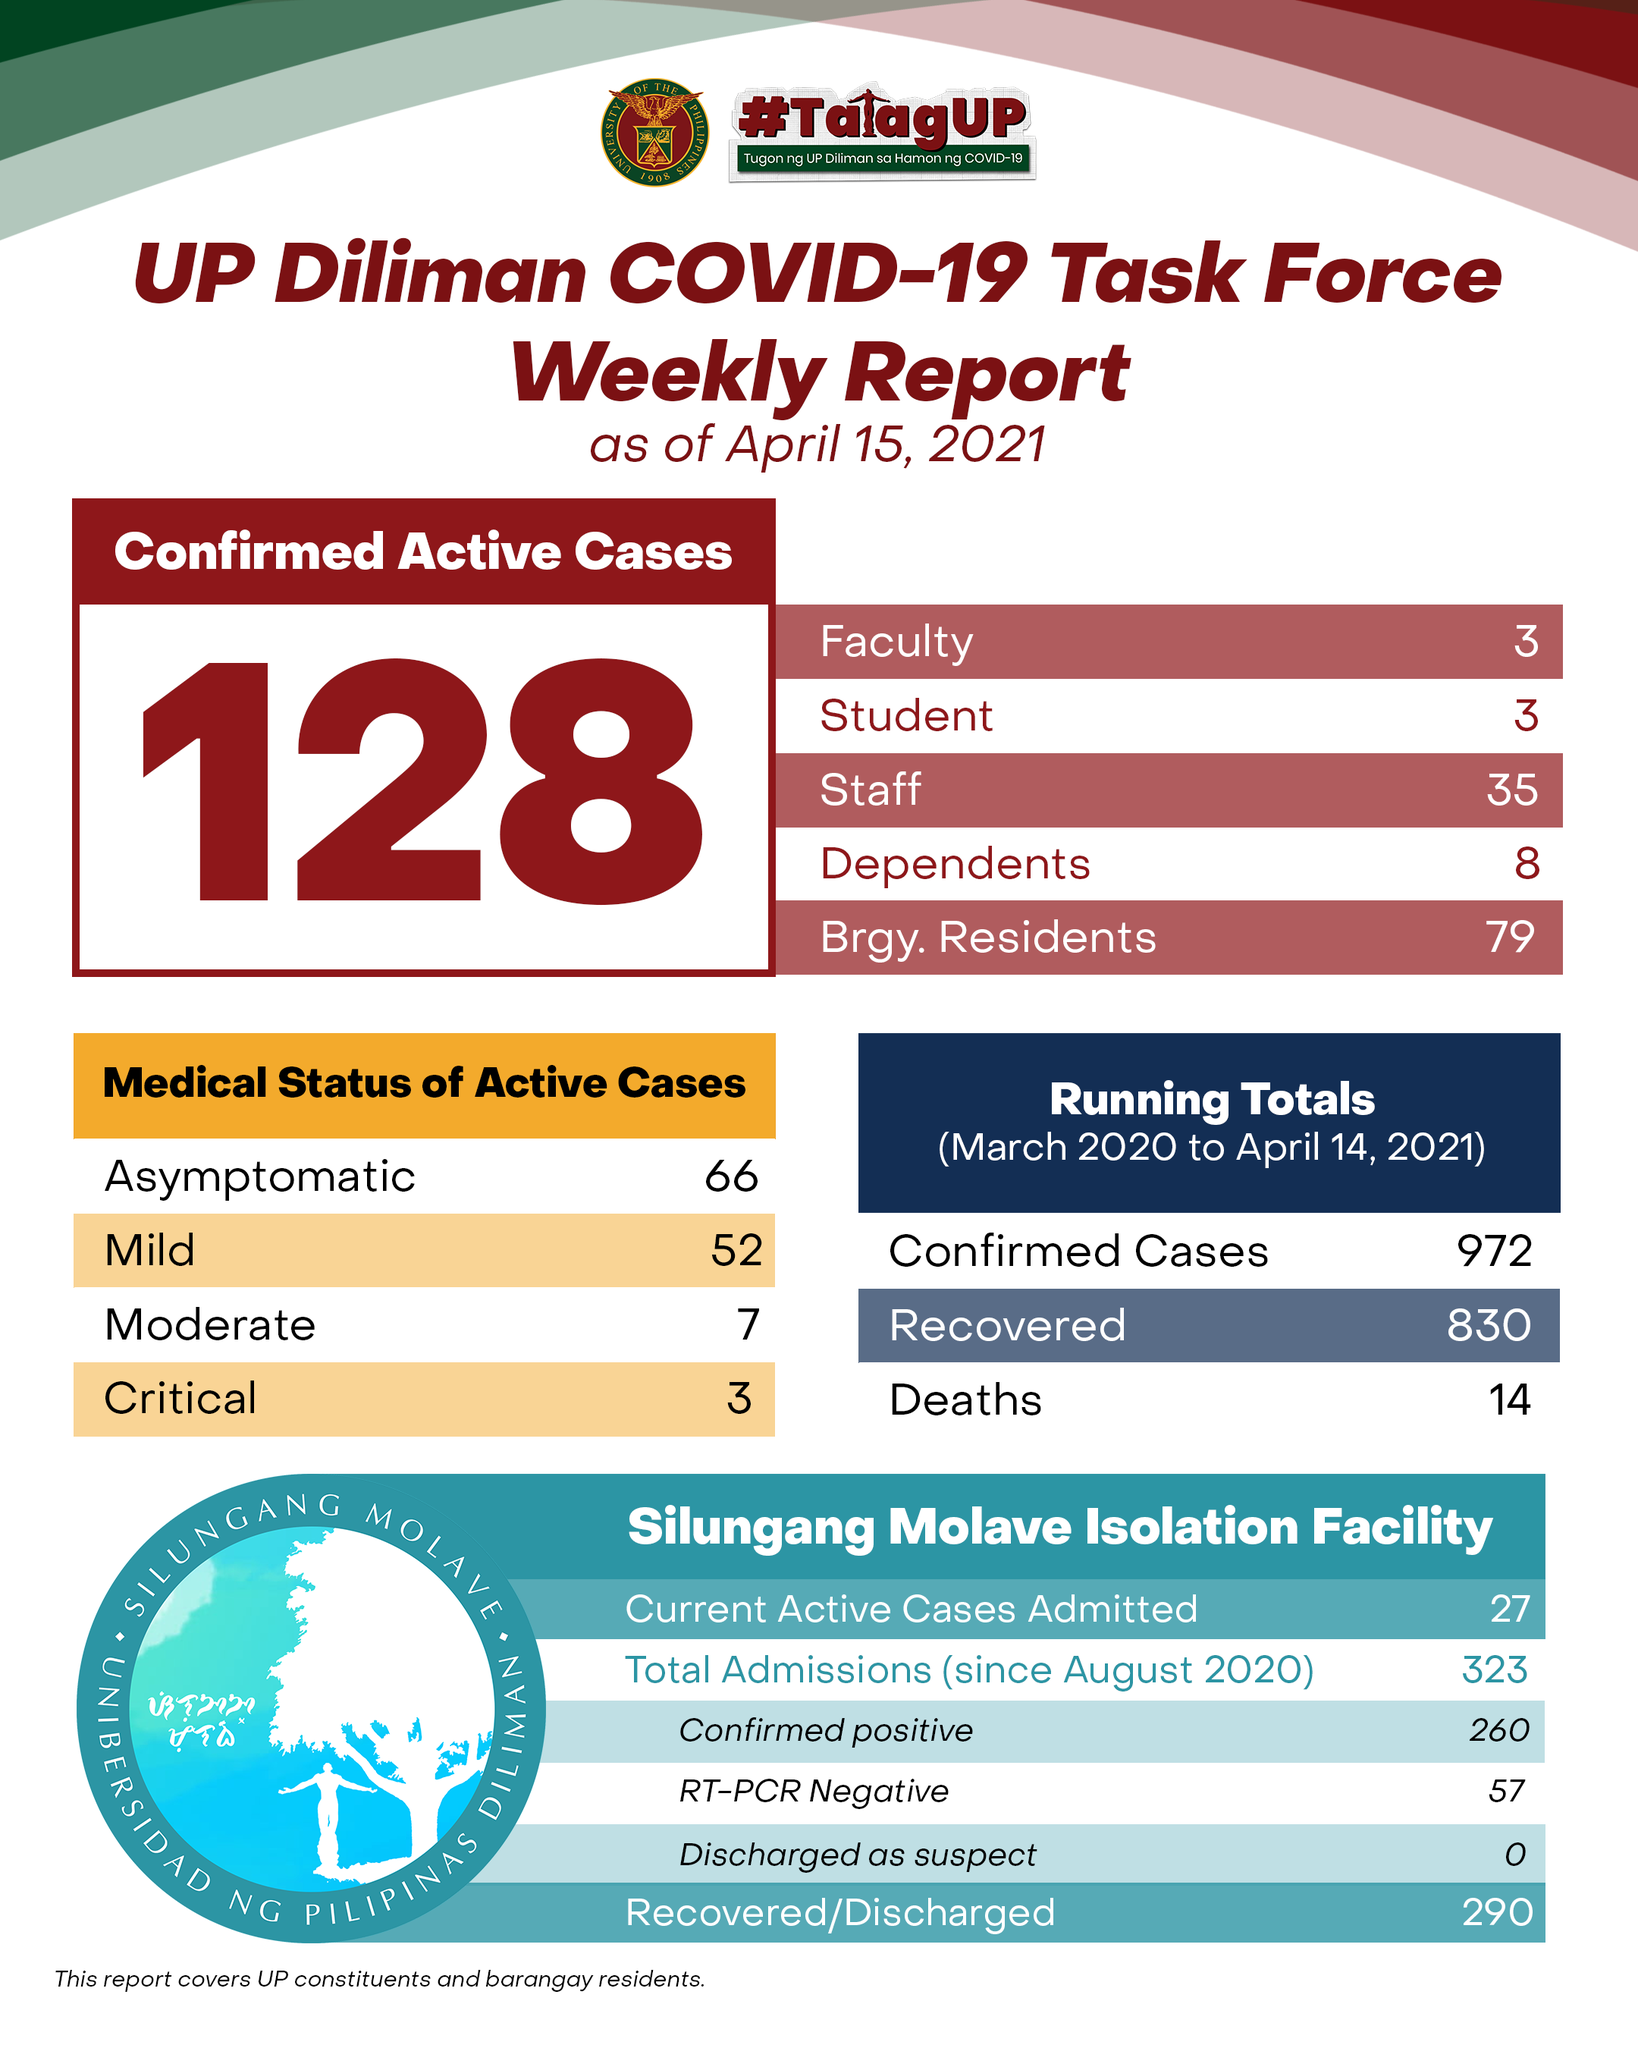 UP Diliman COVID-19 Task Force Weekly Report as of April 15, 2021